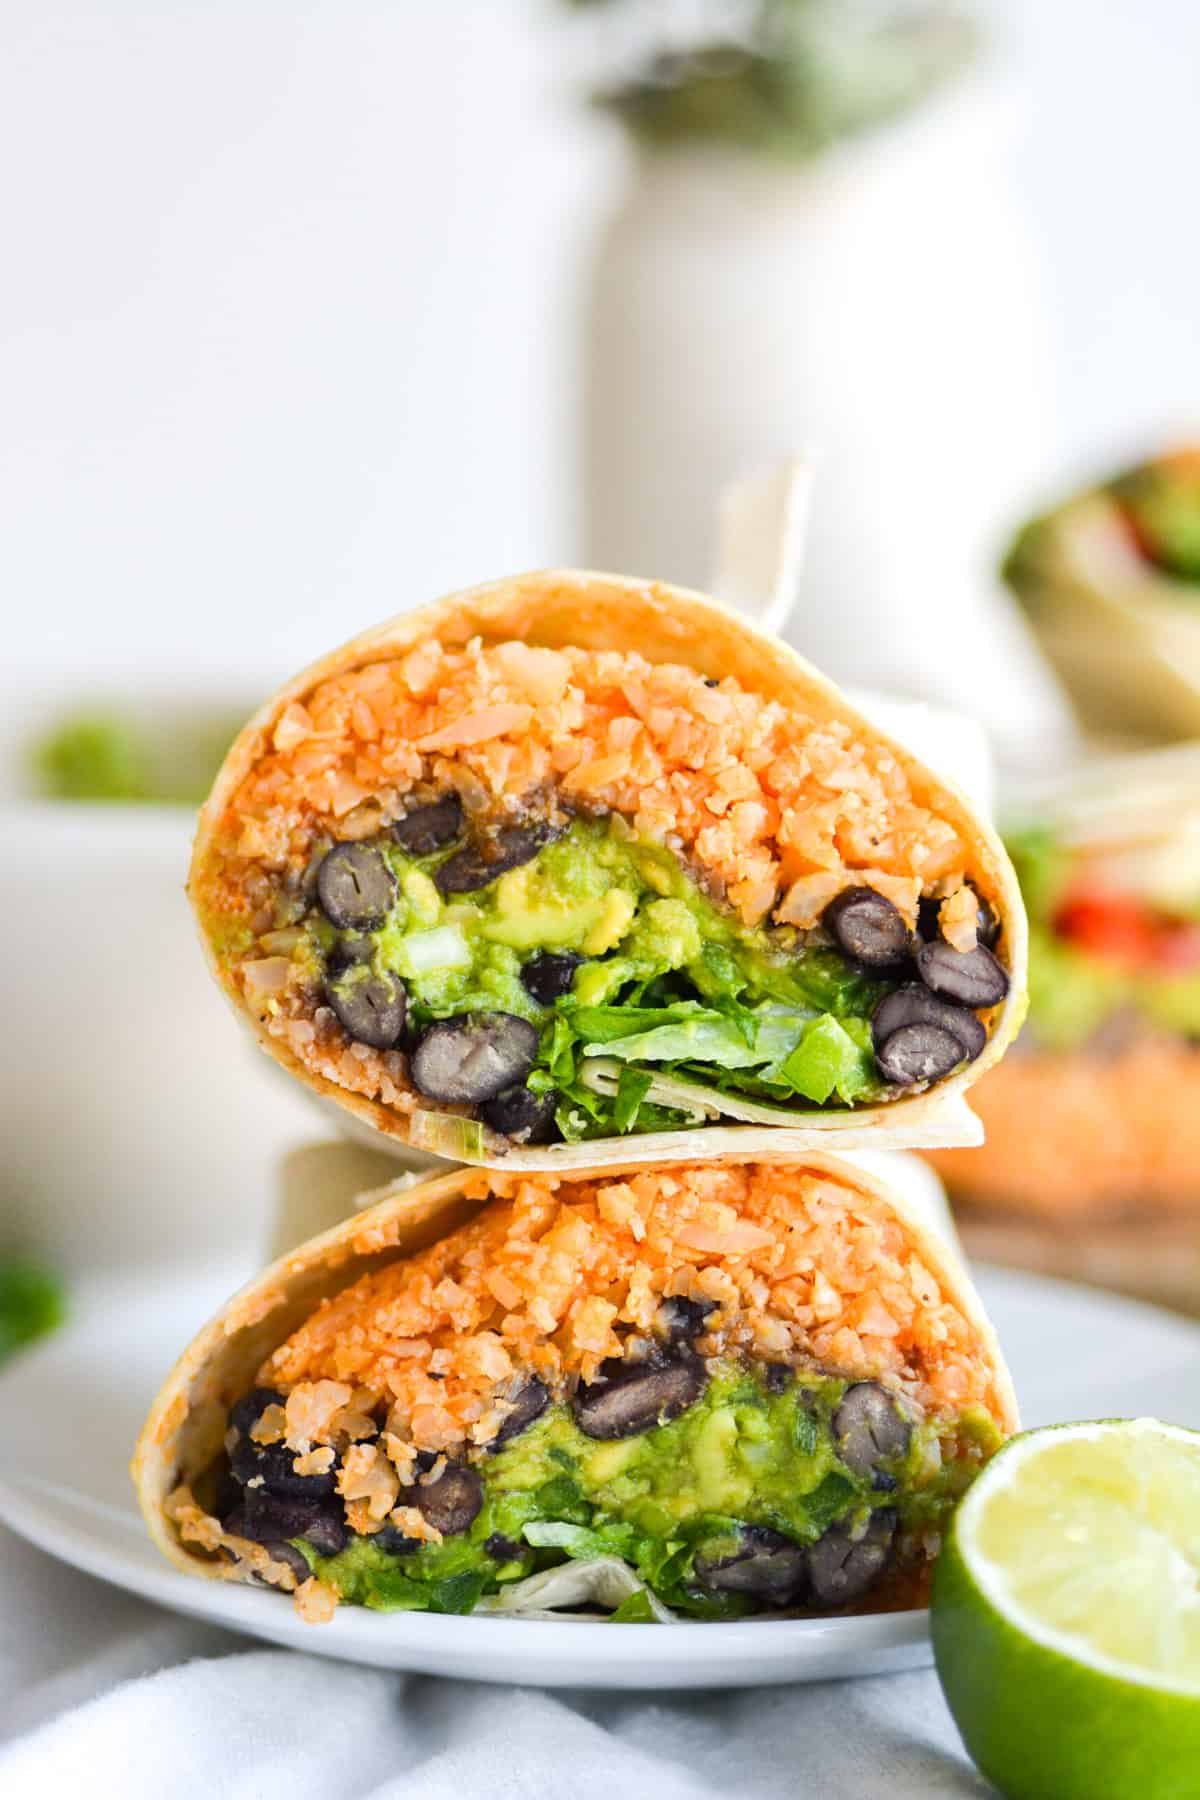 Black Bean Burrito cut in half. The halves are stacked on top of each other on a small plate.